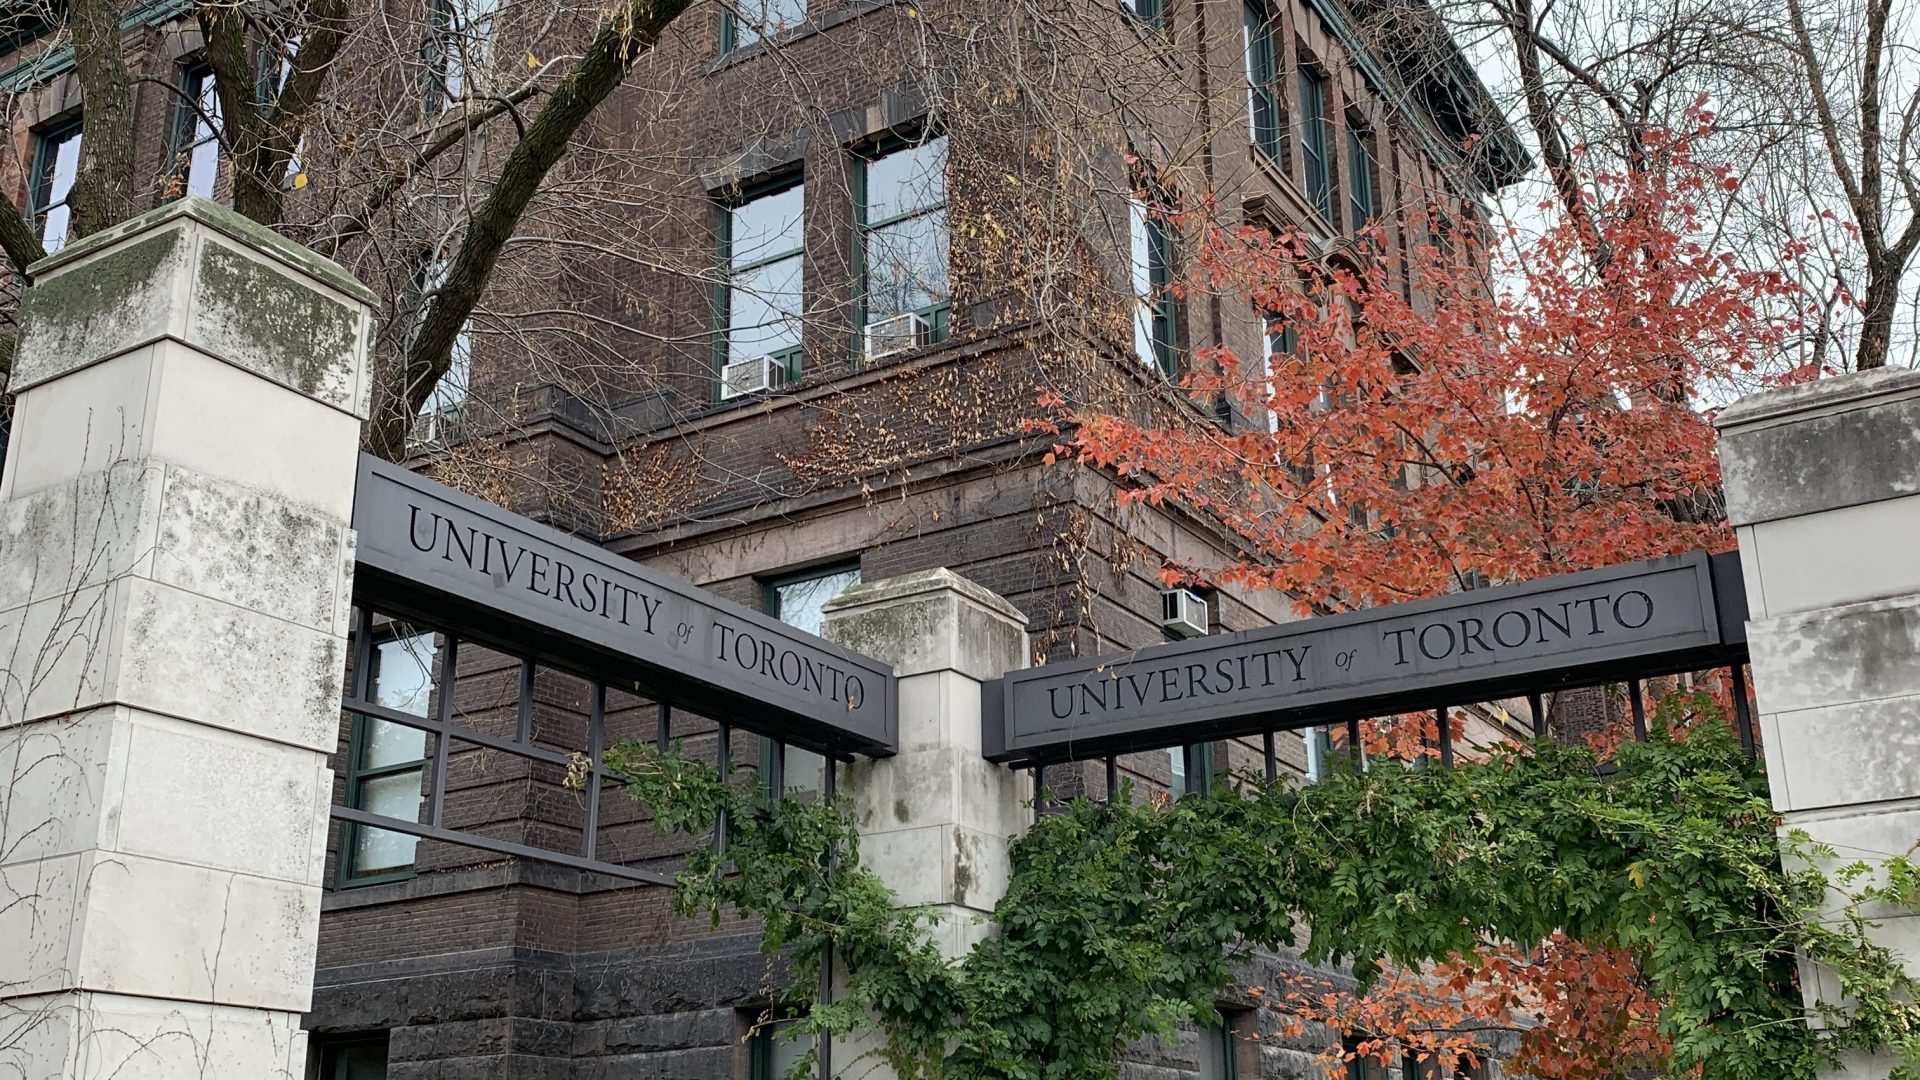 an on-campus monument that reads "University of Toronto"